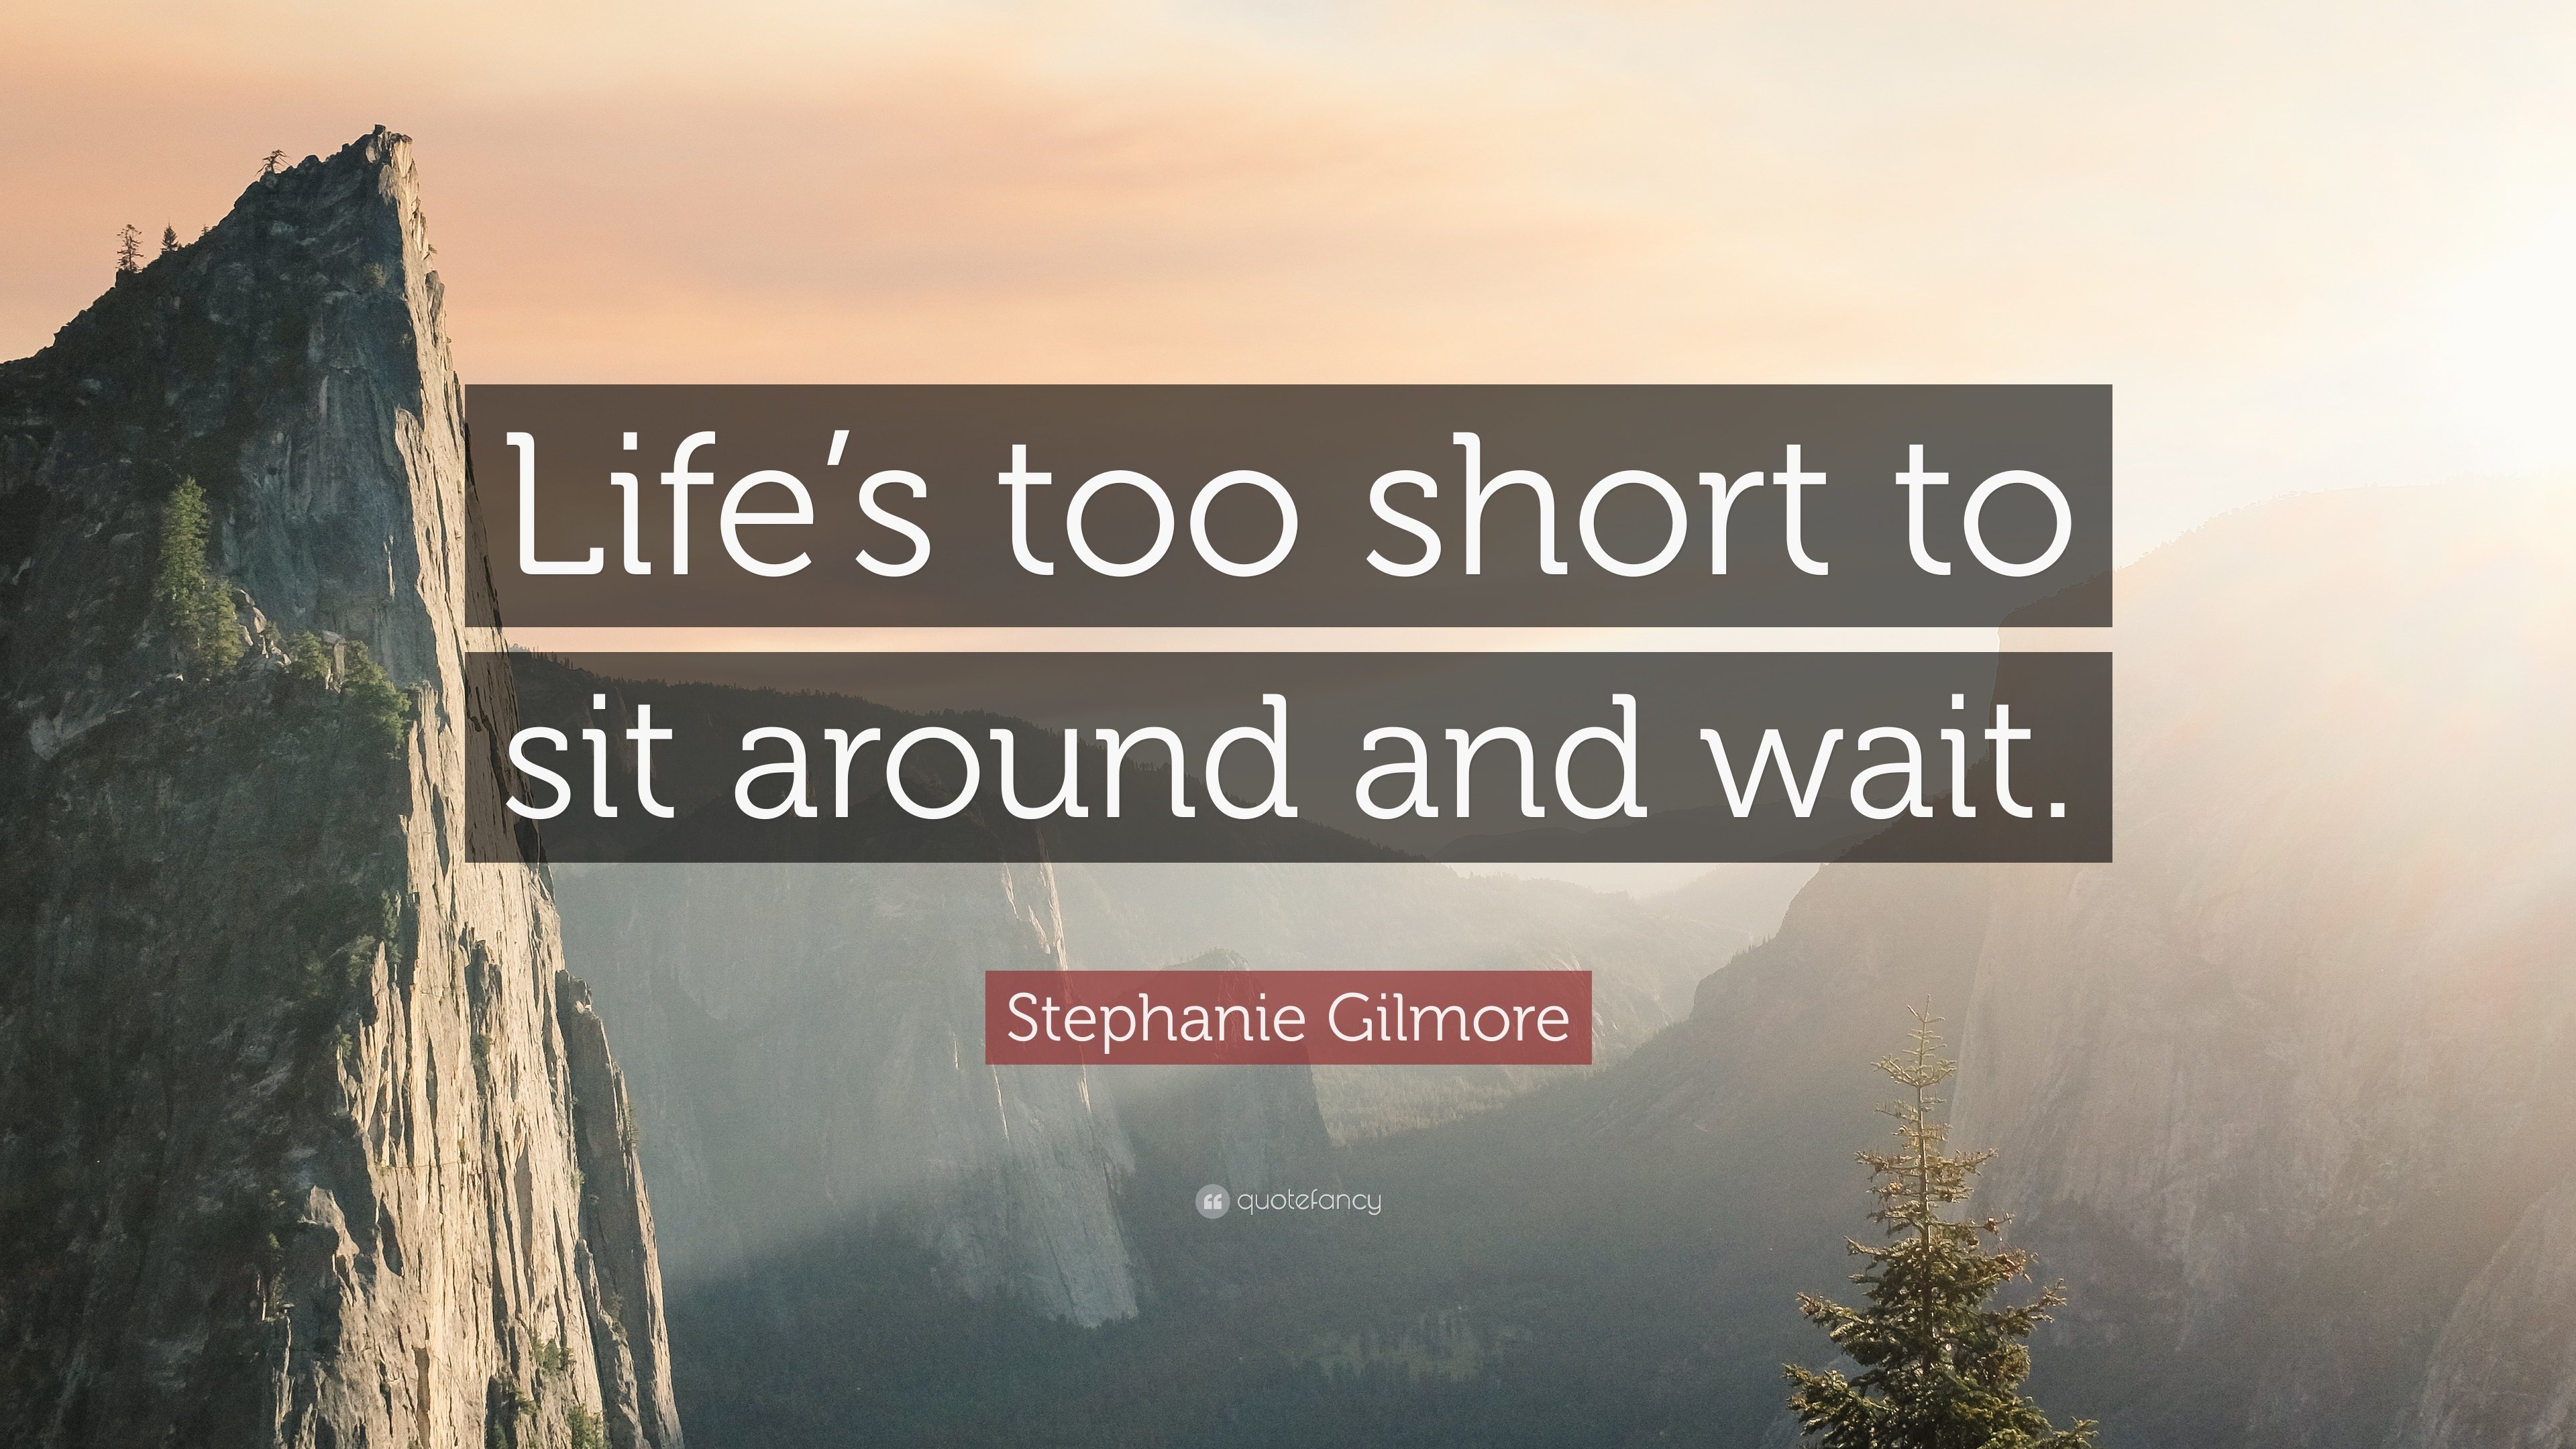 Stephanie Gilmore Quote: “Life's too short to sit around